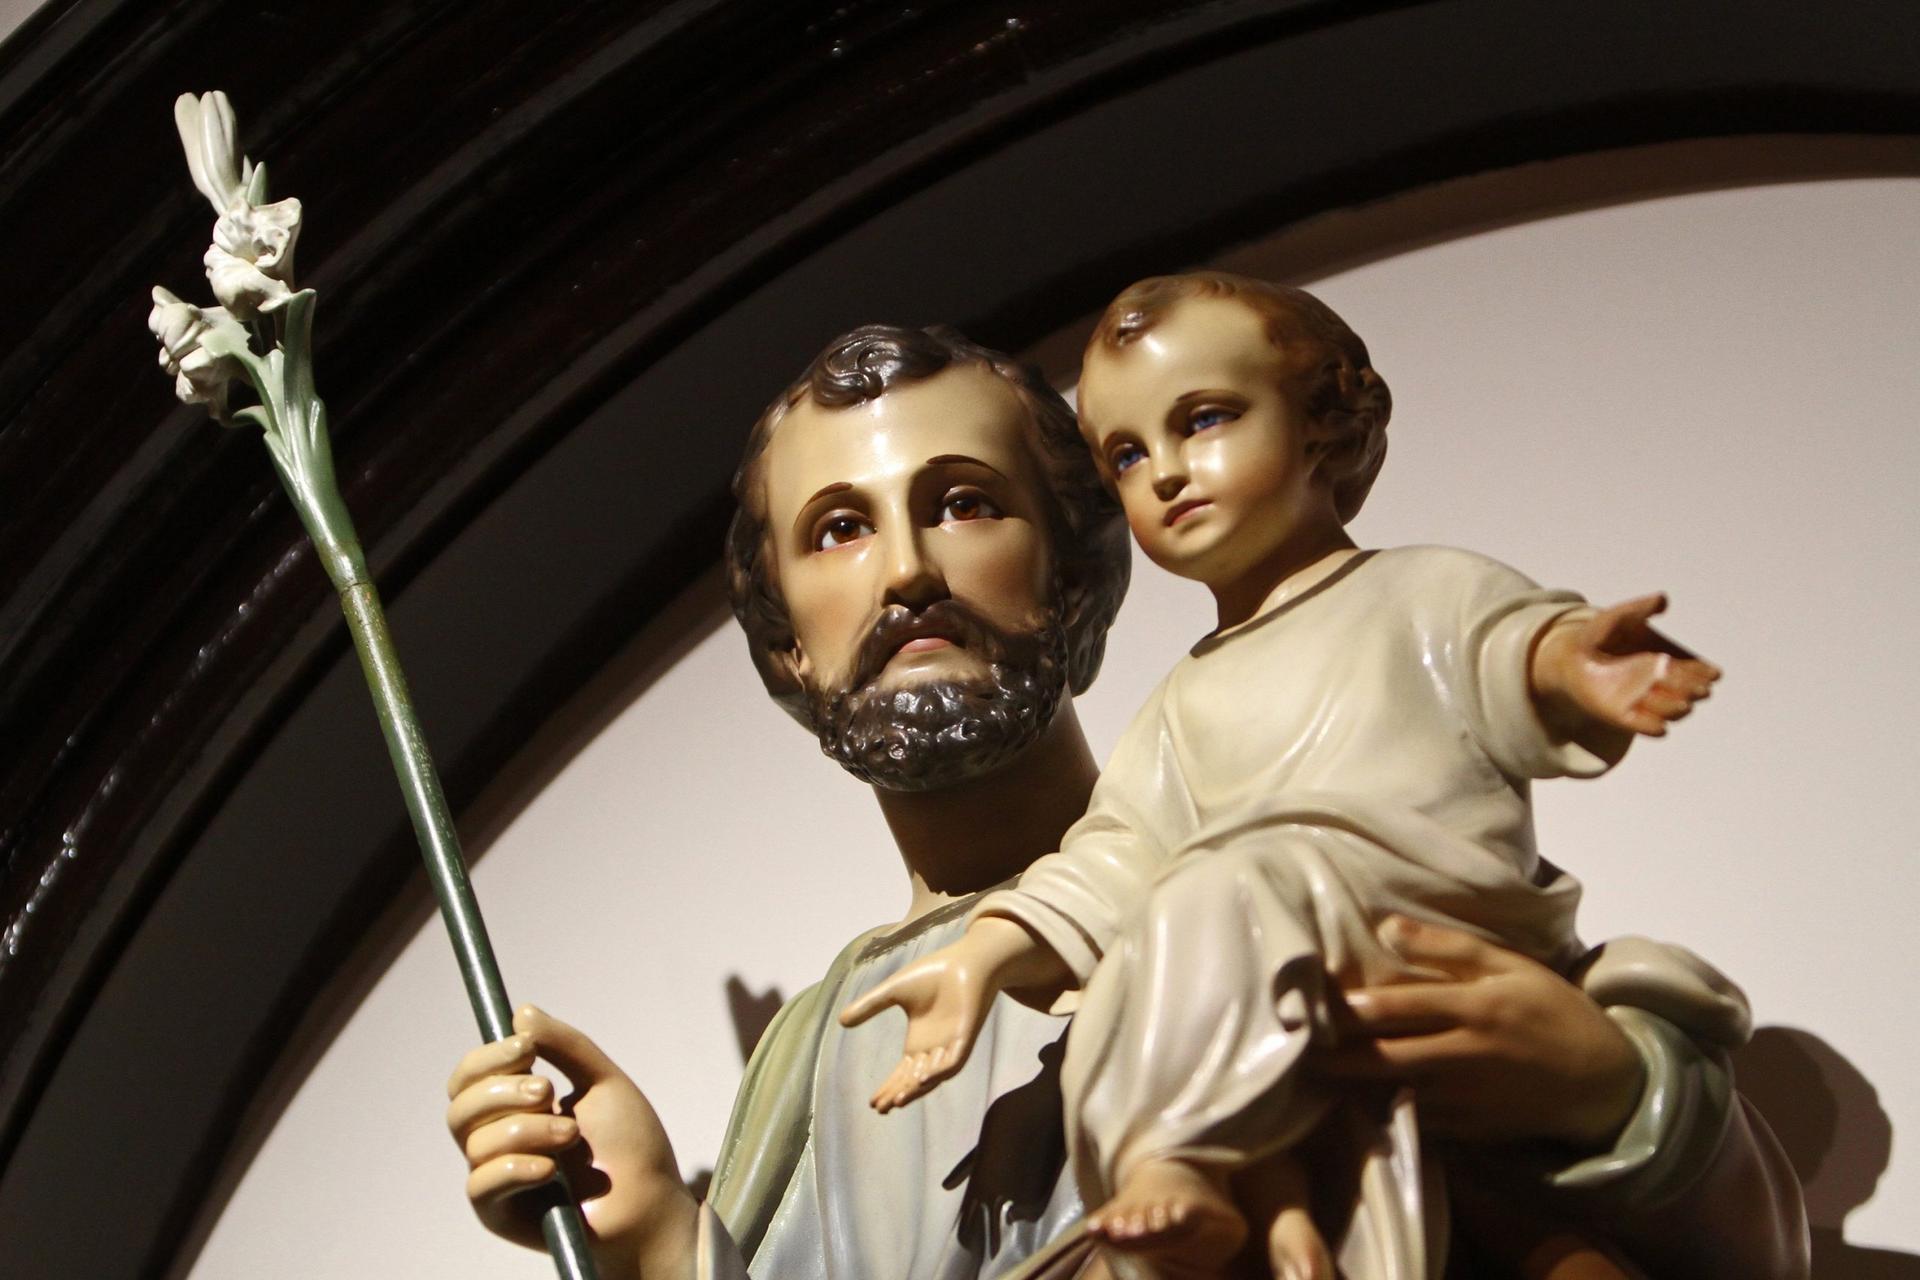 Josephite order elated by year dedicated to St. Joseph proclaimed by pope